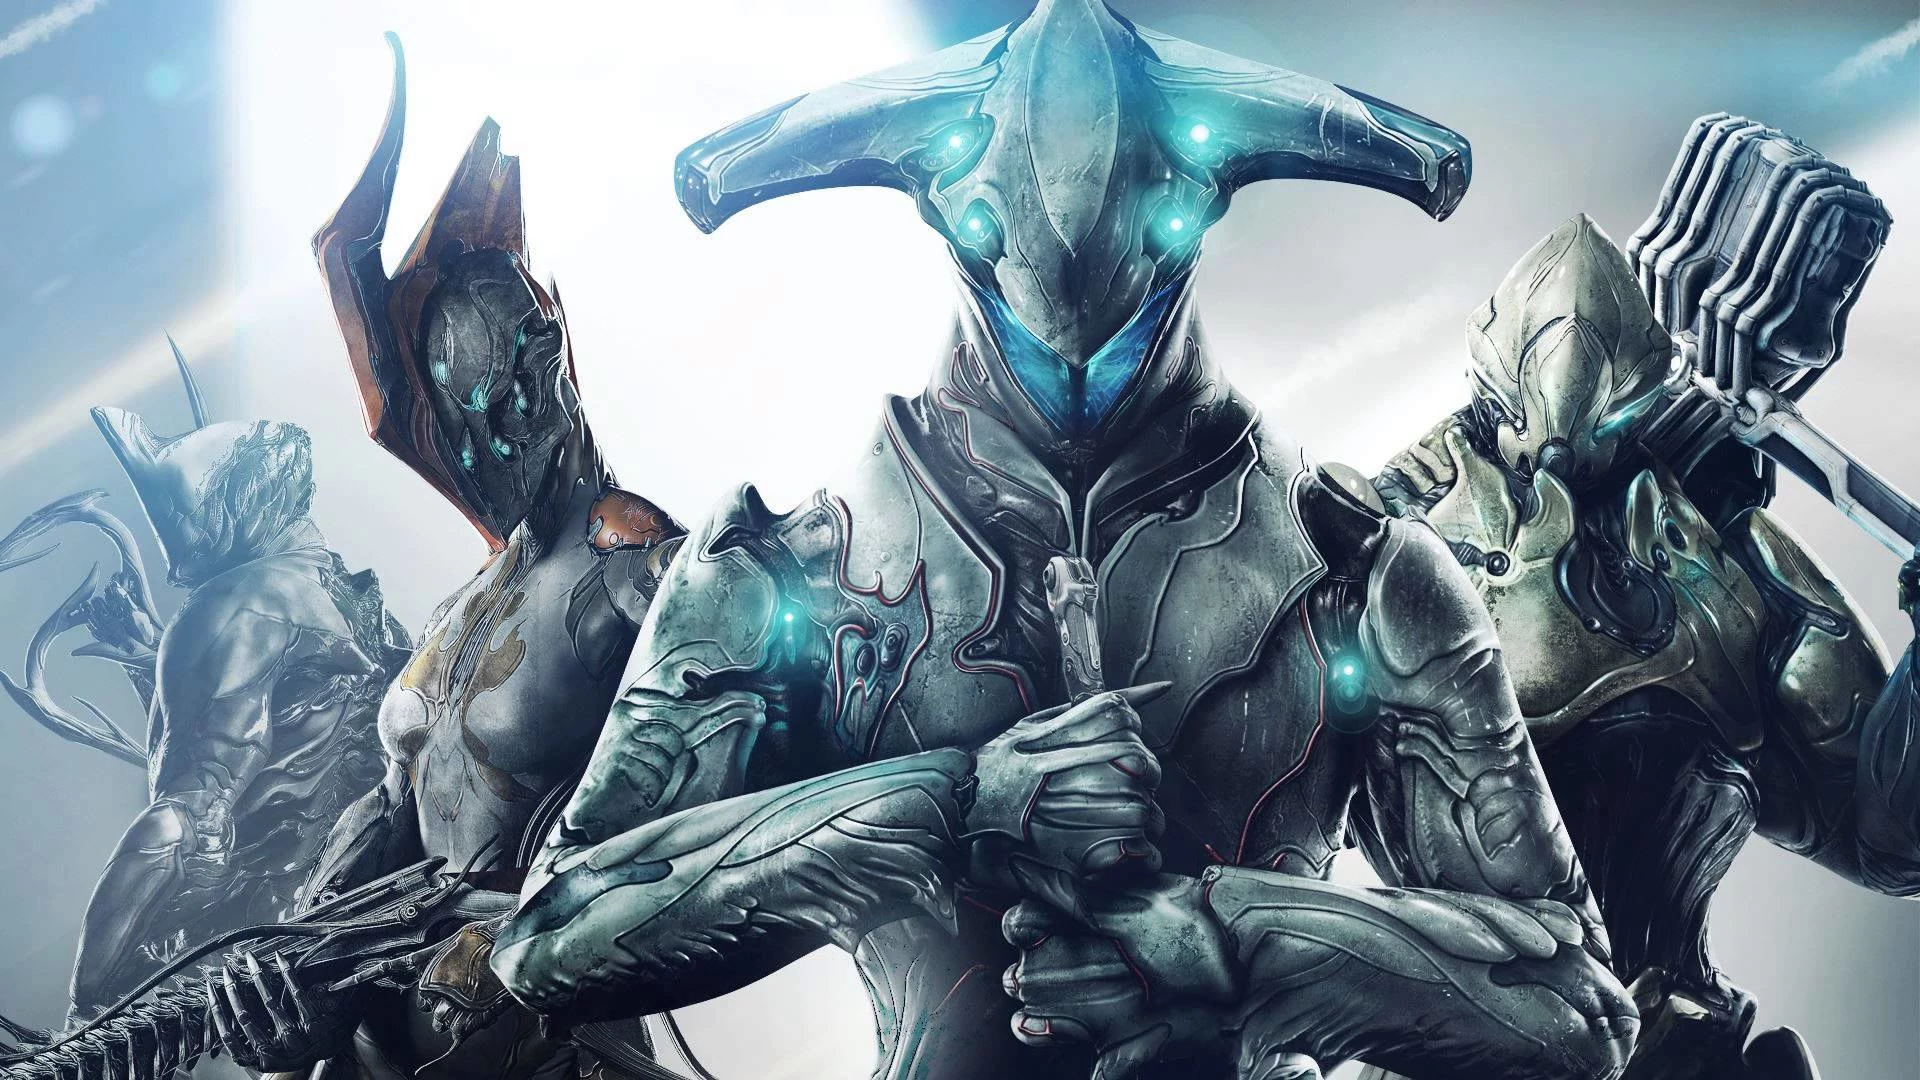 Warframe fans have a message for the developers: stay healthy, don’t crunch